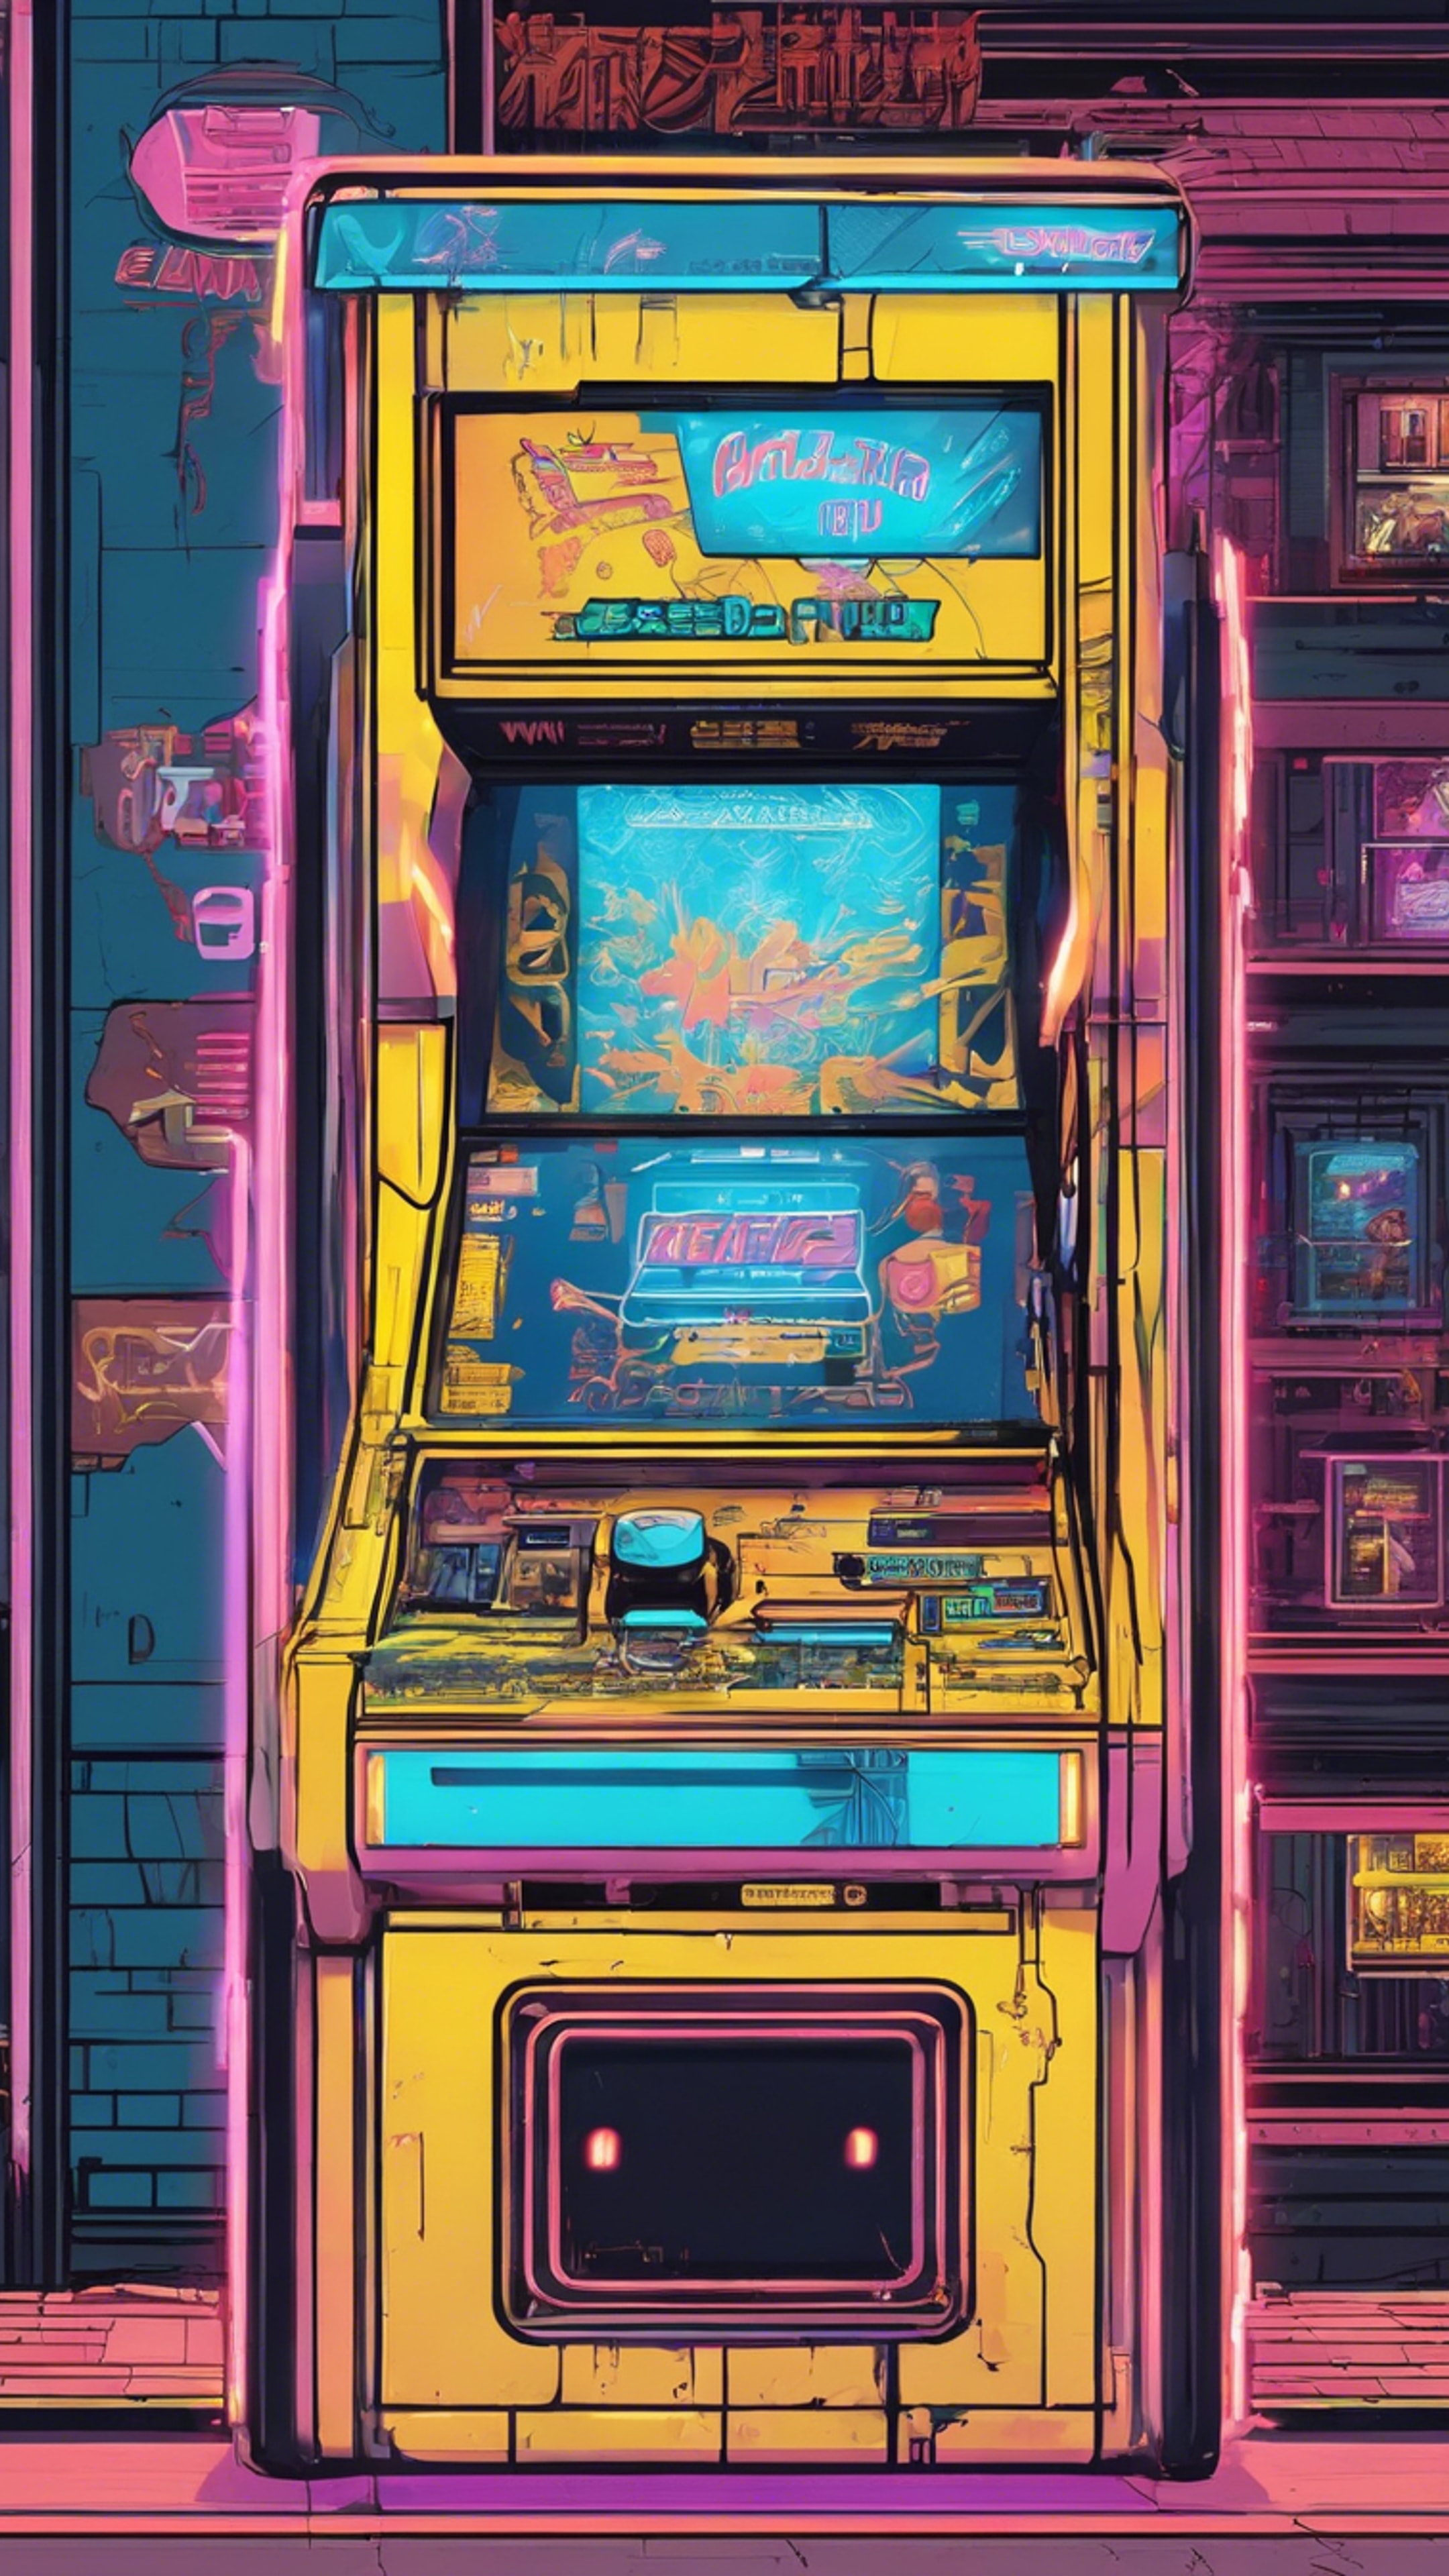 A vintage arcade machine with blue and yellow detailing, set in a retro game shop. Ფონი[7a93d221b5de45b8b20a]